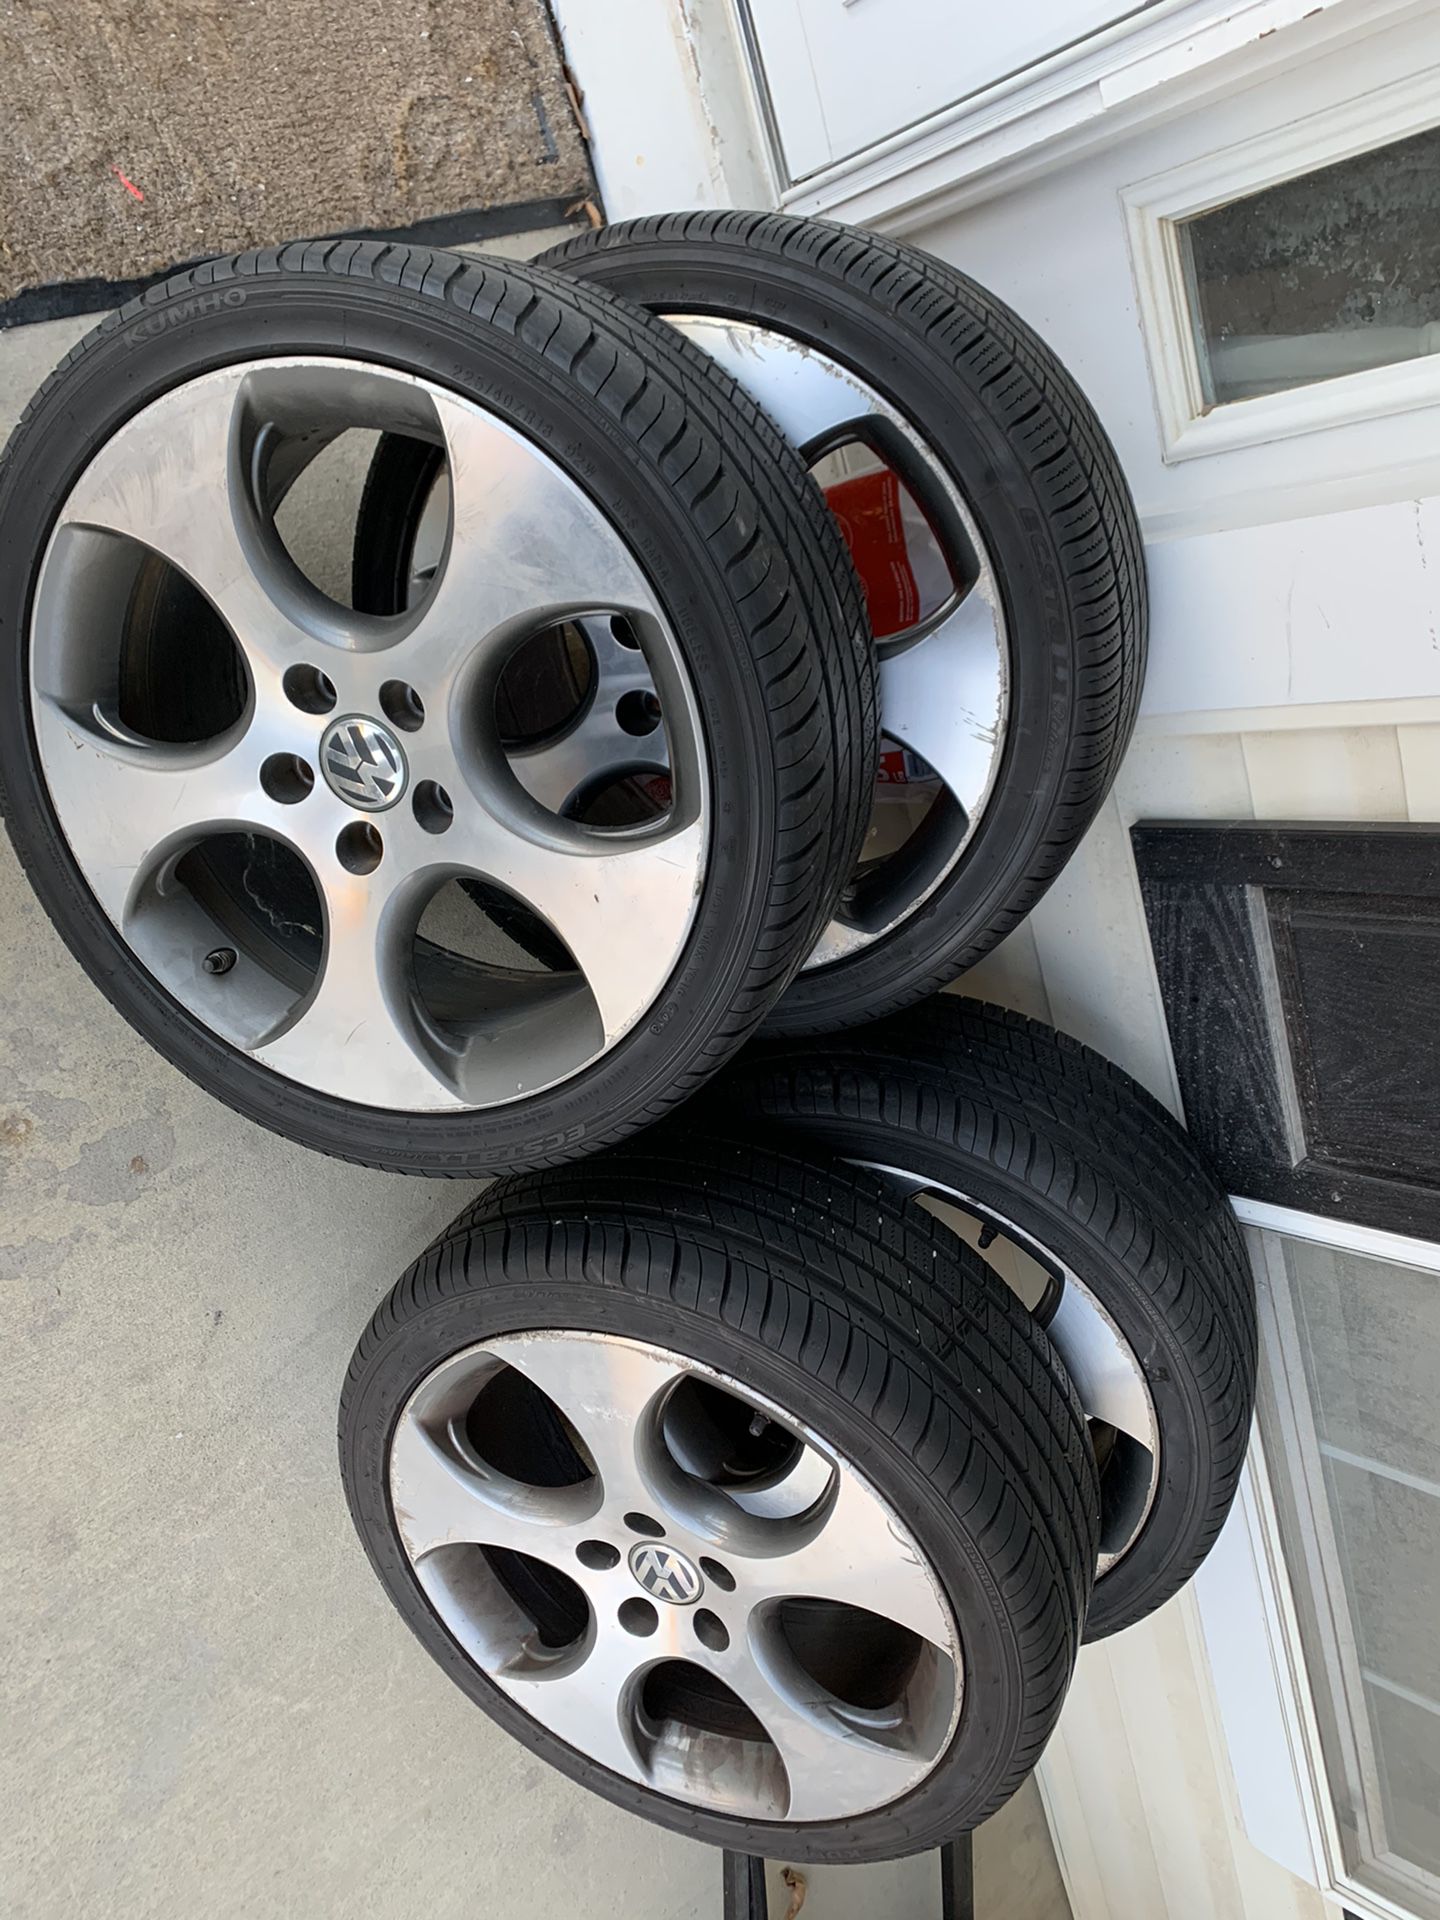 18” rims with three good tires